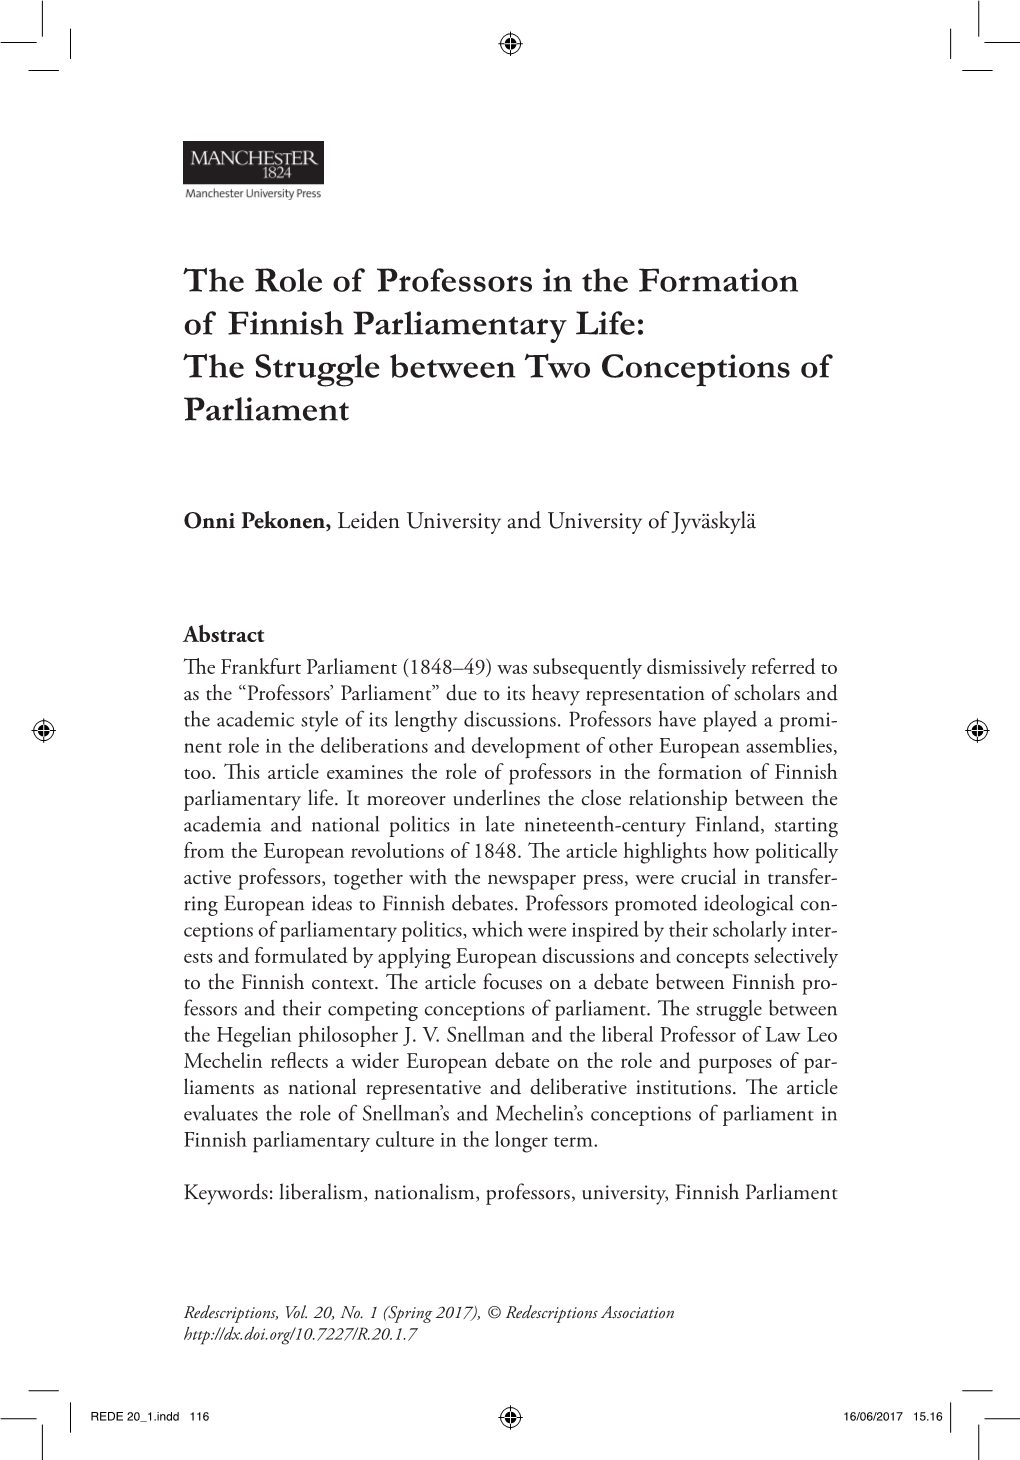 The Role of Professors in the Formation of Finnish Parliamentary Life: the Struggle Between Two Conceptions of Parliament